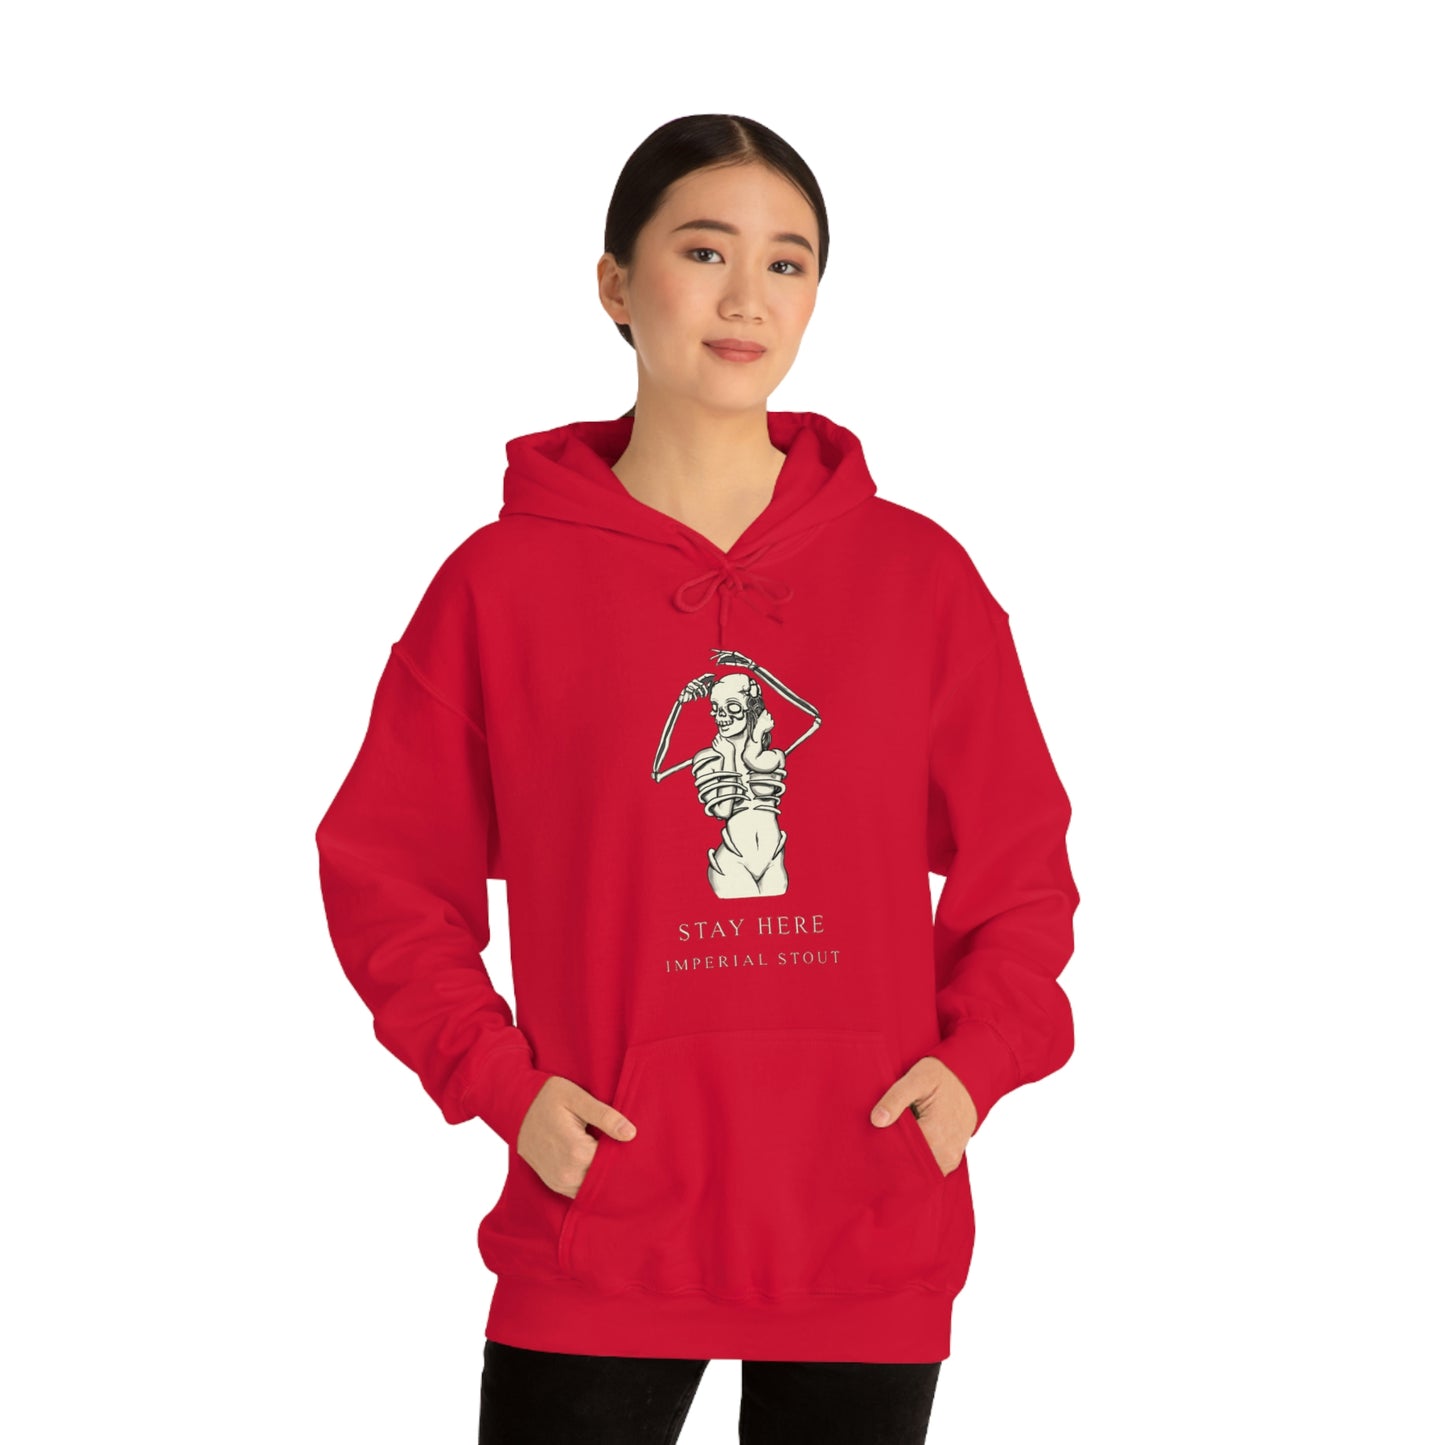 Stay Here Imperial Stout Hooded Sweatshirt